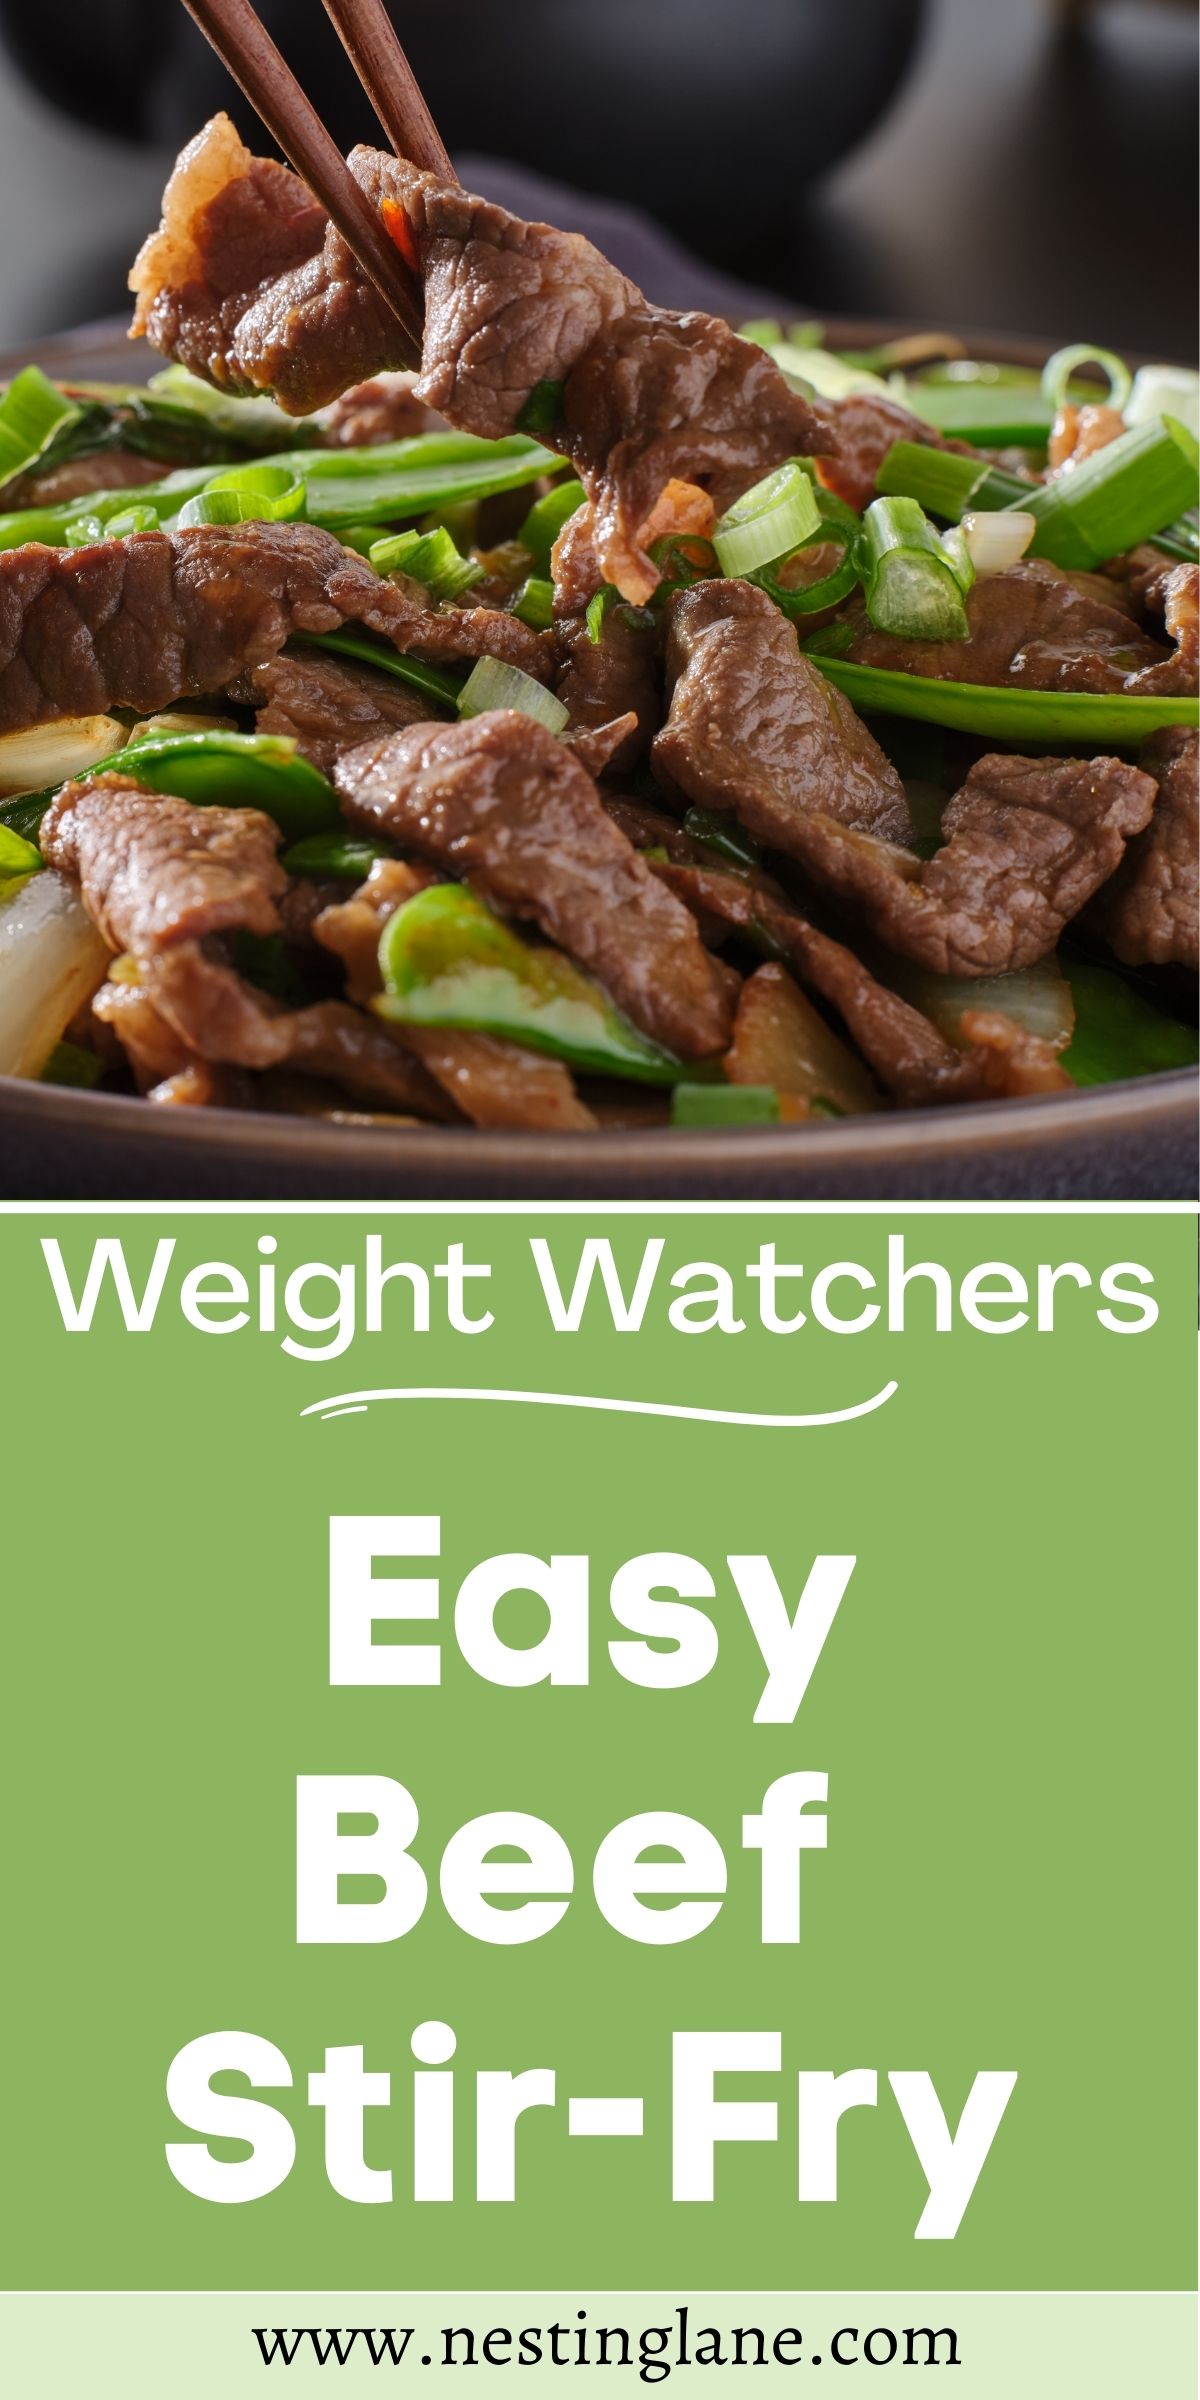 Graphic for Pinterest of Weight Watchers Easy Beef Stir-Fry Recipe.